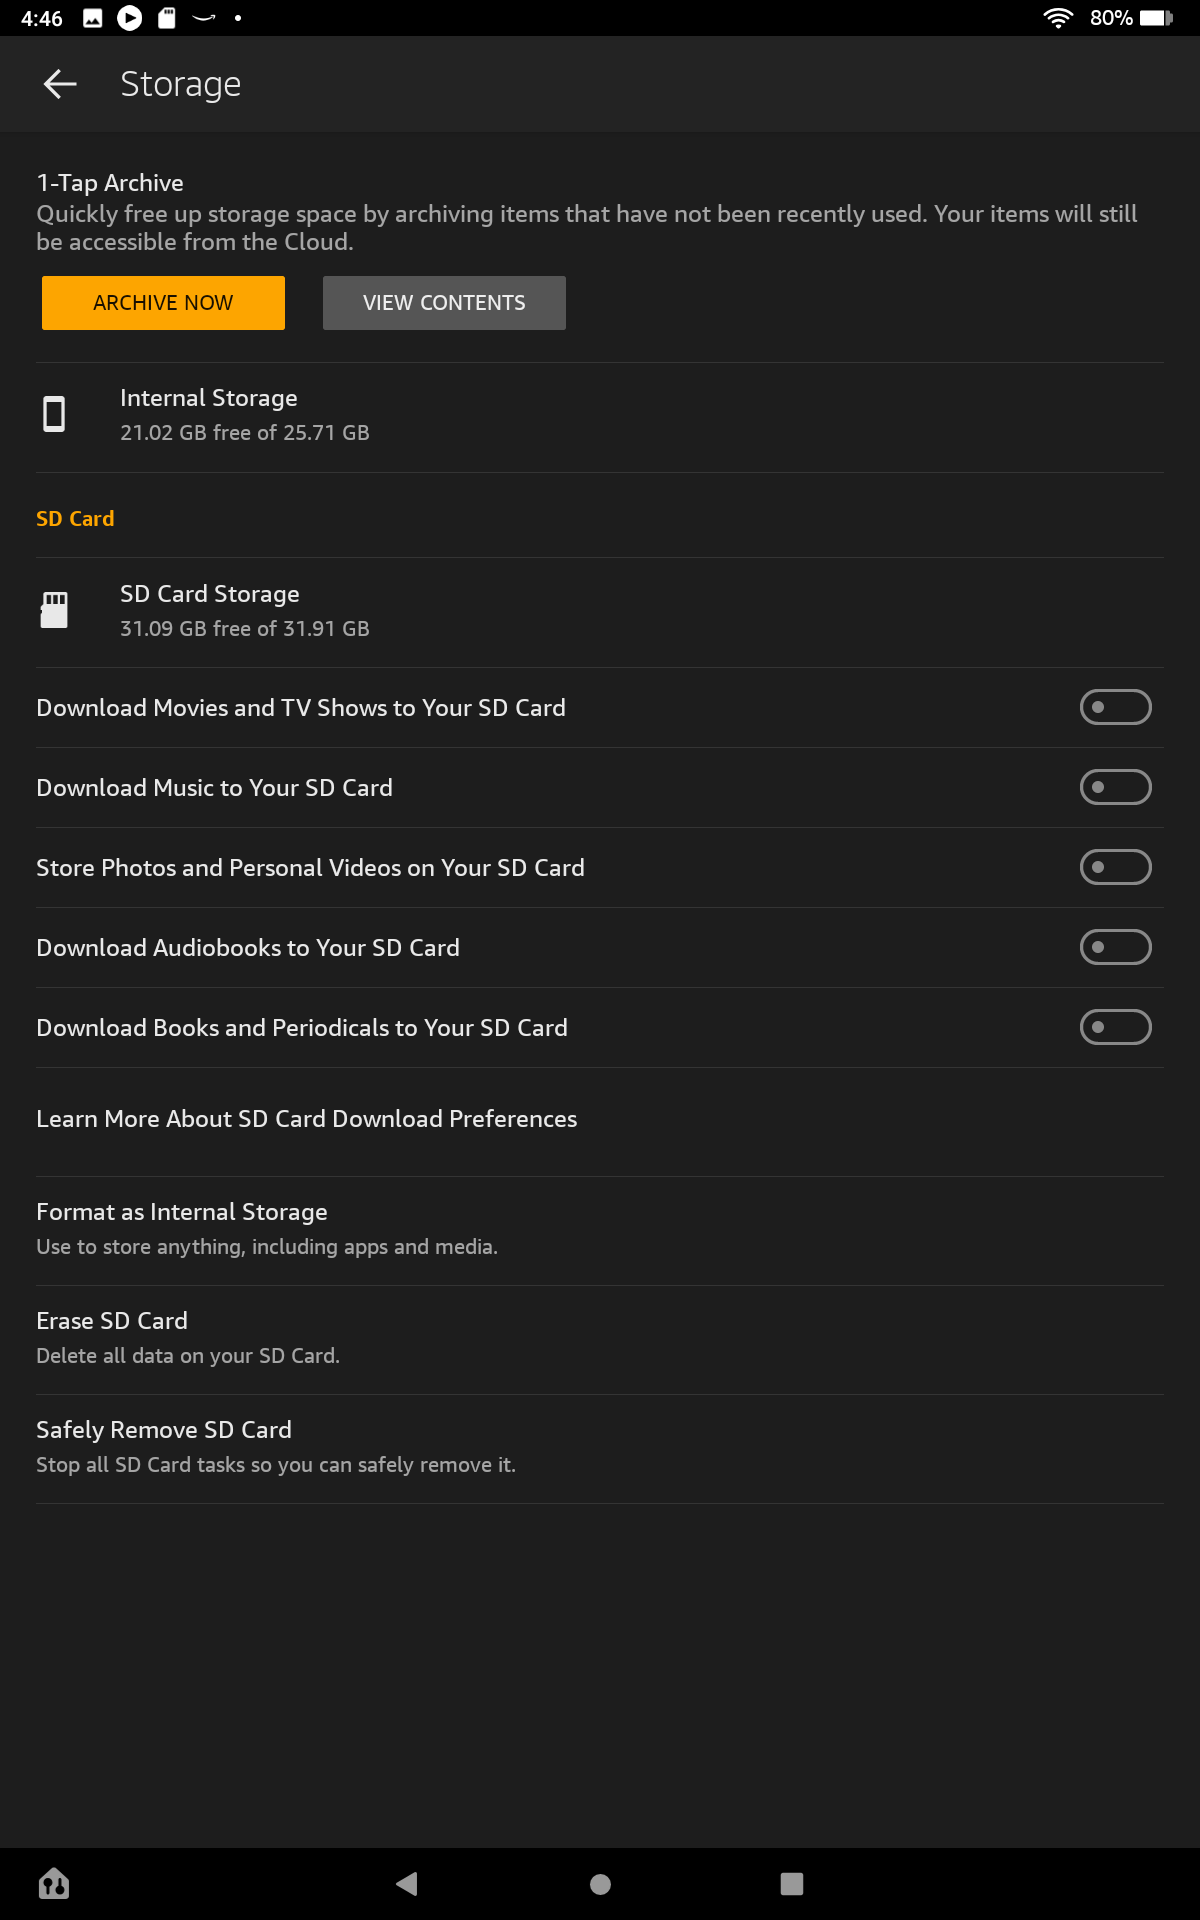 The Settings page for manage storage and SD cards on Fire OS, with options to download content to and format the memory card.